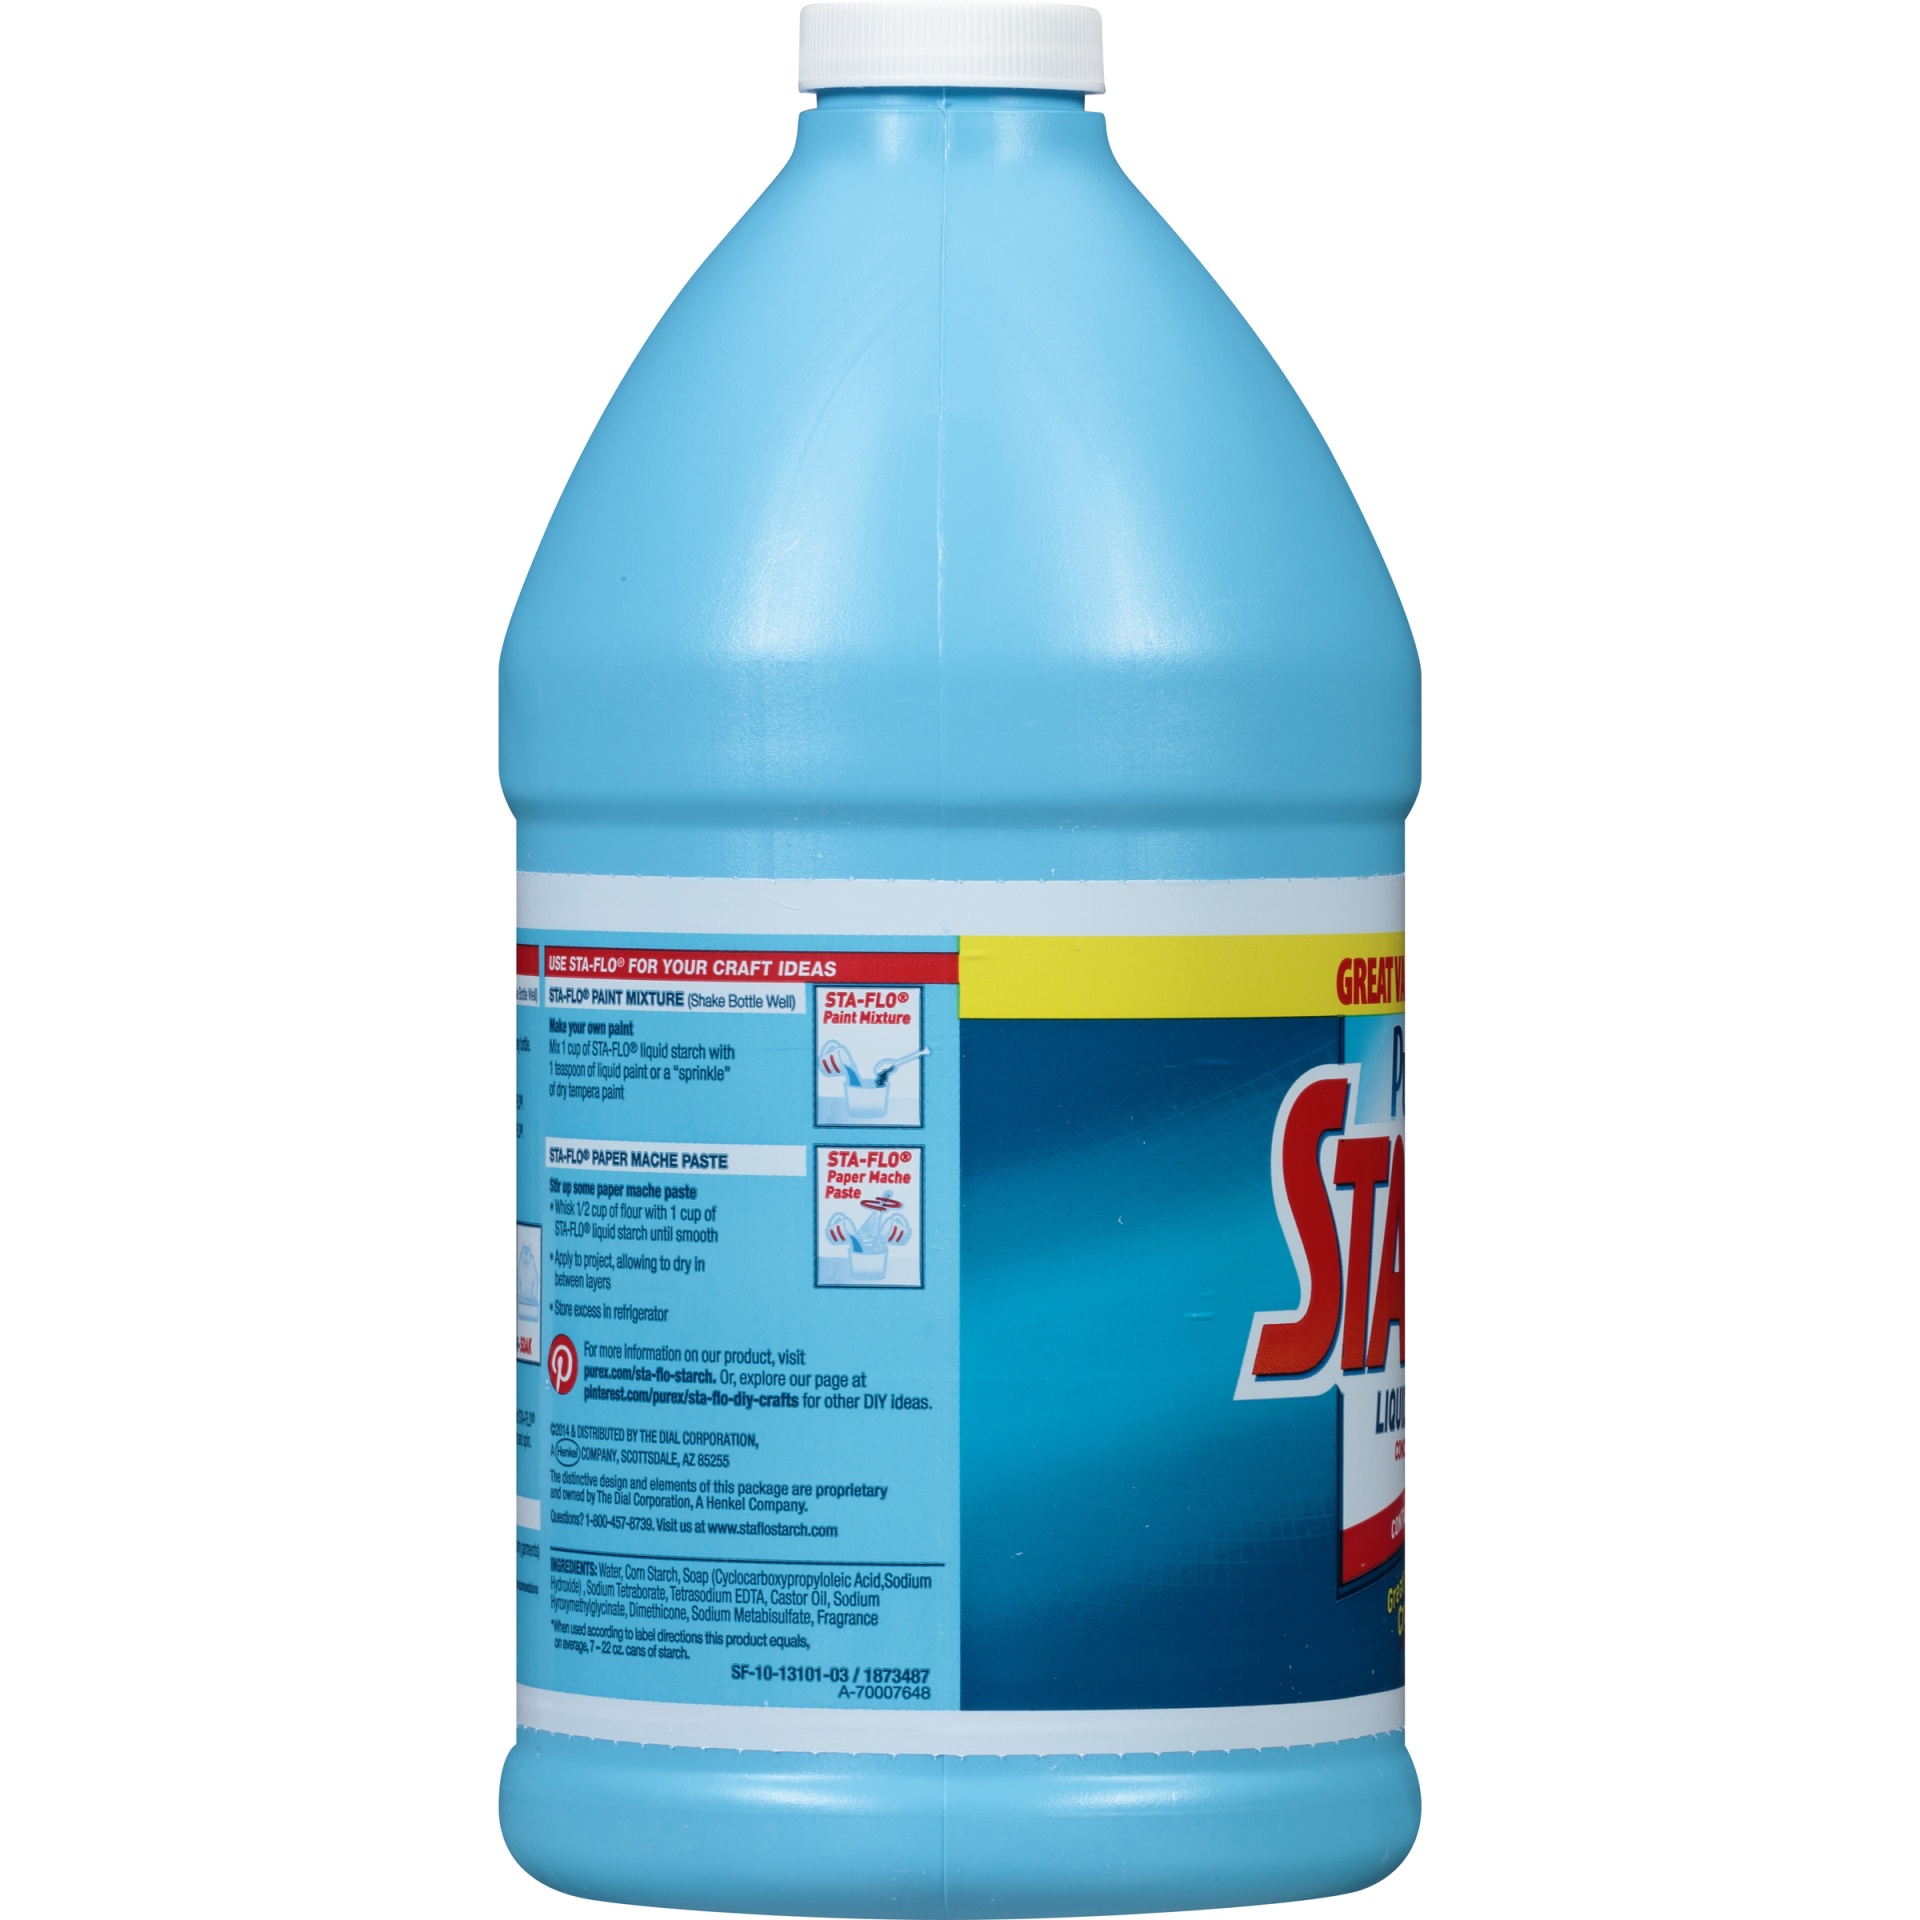 Two Bottles of Sta-Flo Liquid Starch 64oz for Sale in Torrance, CA